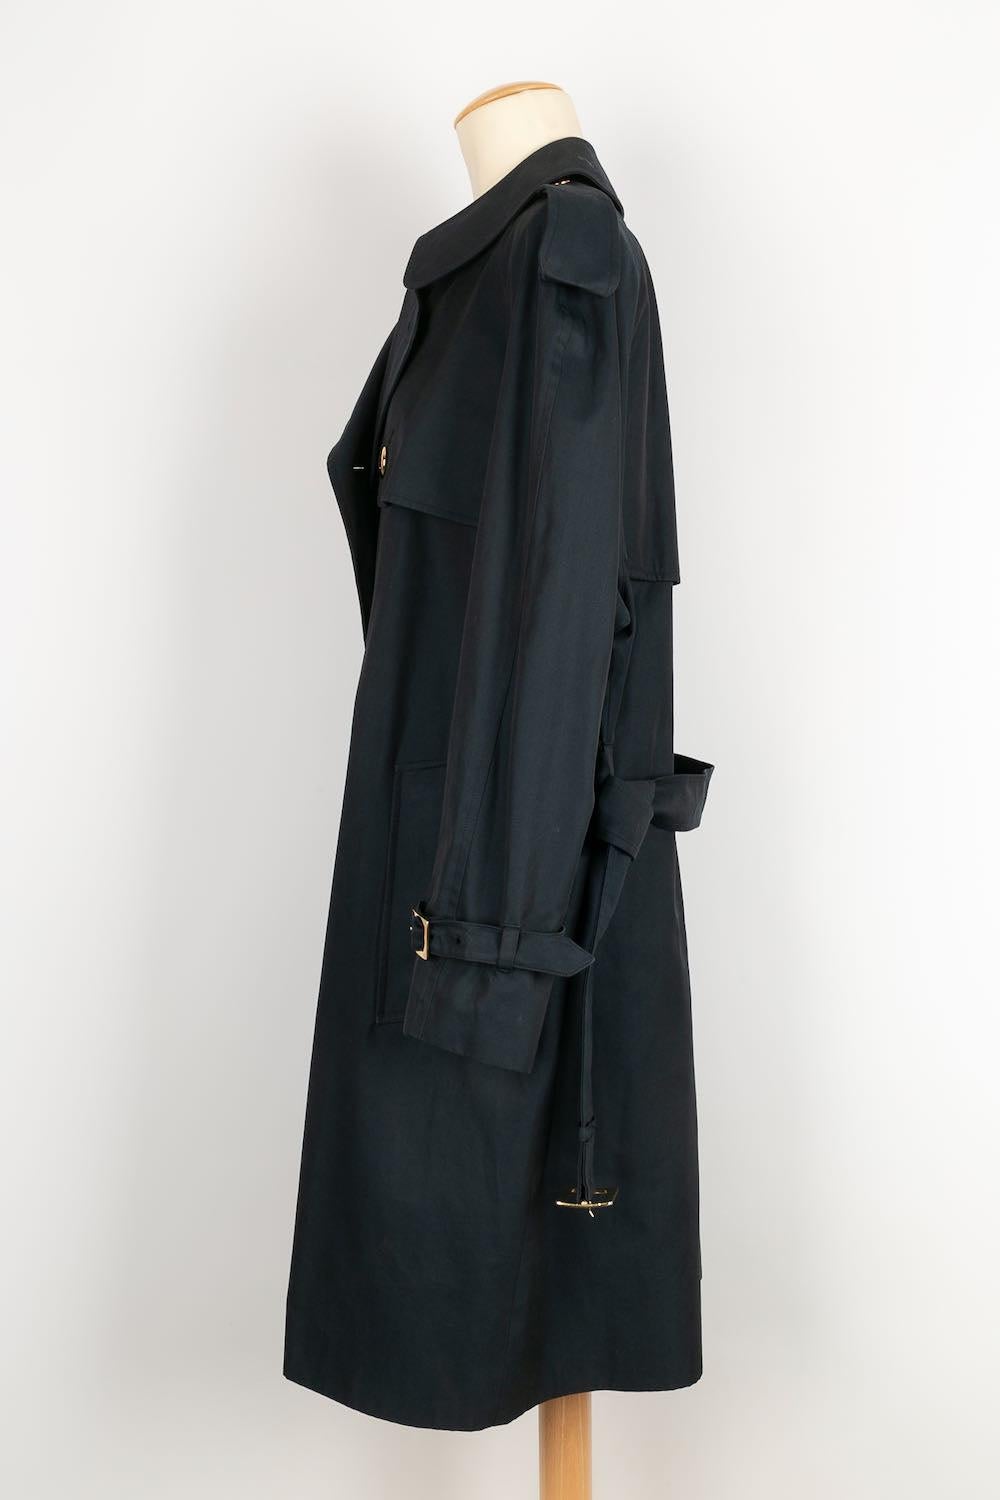 Women's Christian Dior Navy Blue Trench Coat For Sale